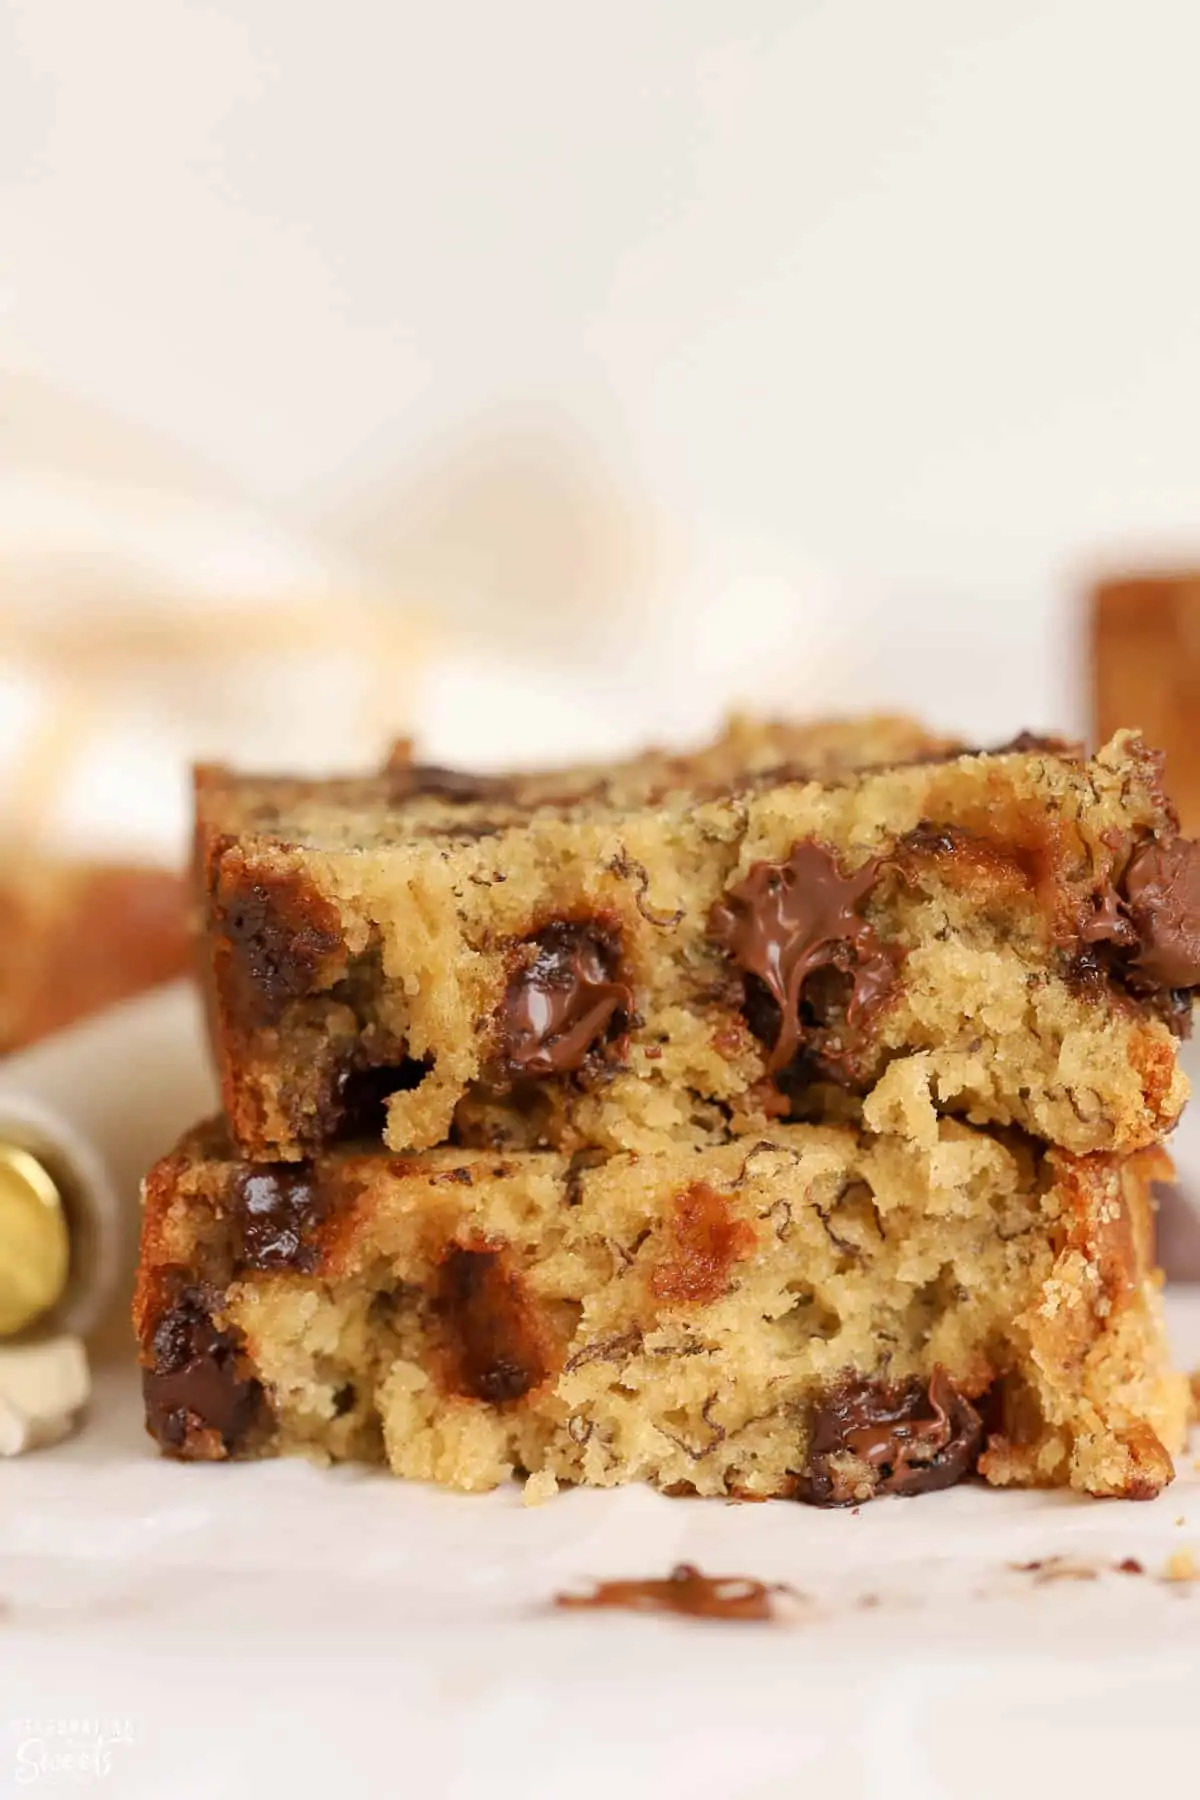 Closeup of a slice of banana bread filled with chocolate chips.